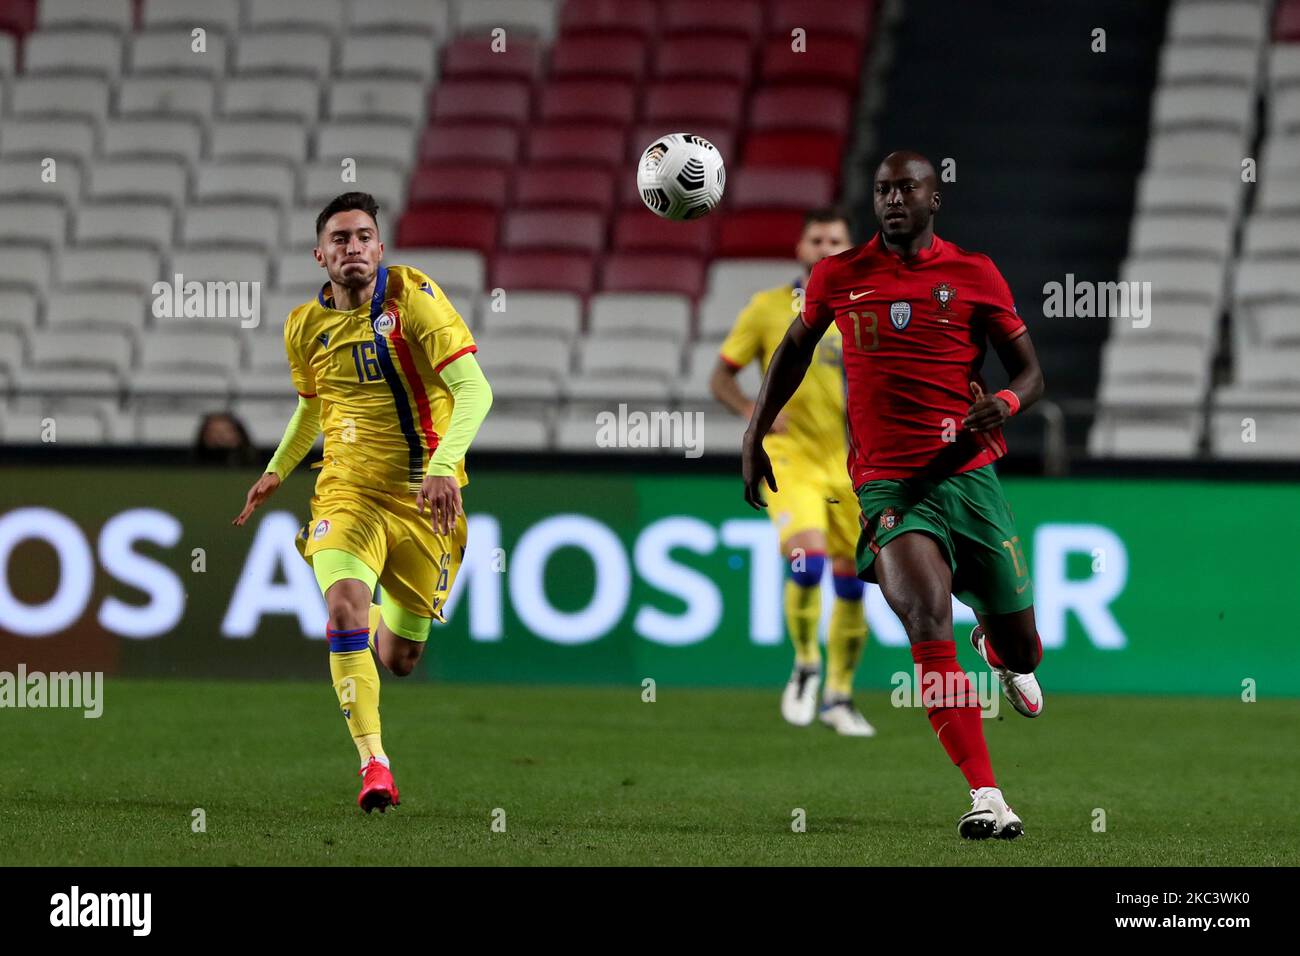 Danilo of Portugal (R ) vies with Alex Martnez of Andorra during the friendly football match between Portugal and Andorra, at the Luz stadium in Lisbon, Portugal, on November 11, 2020. (Photo by Pedro FiÃºza/NurPhoto) Stock Photo